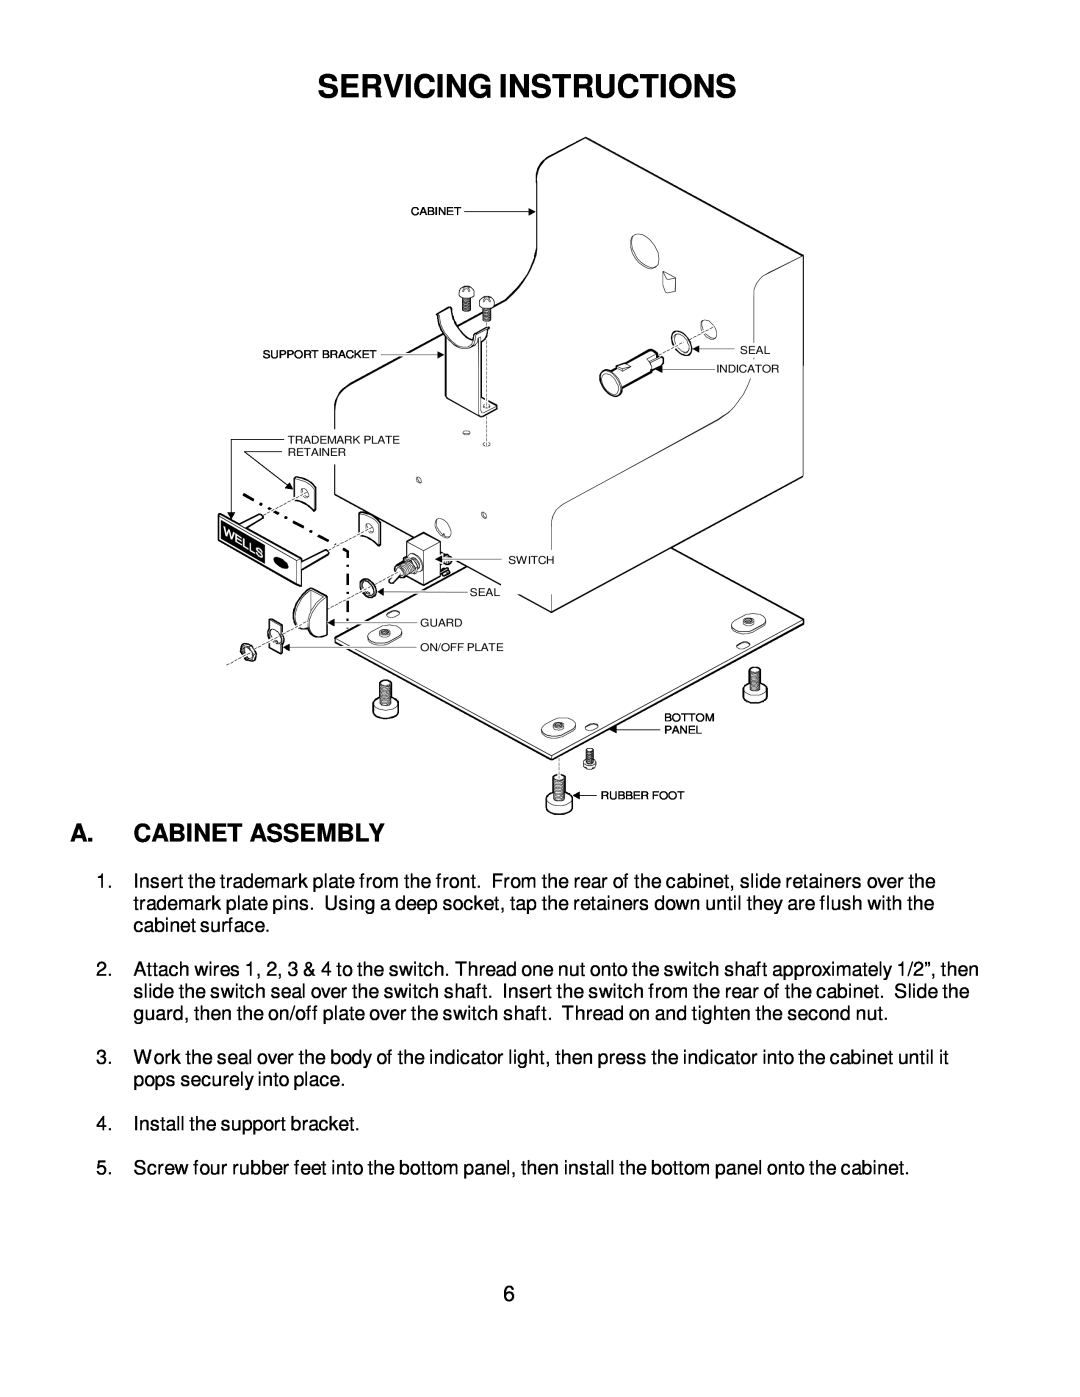 Wells BWB-1S manual Servicing Instructions, A.Cabinet Assembly 